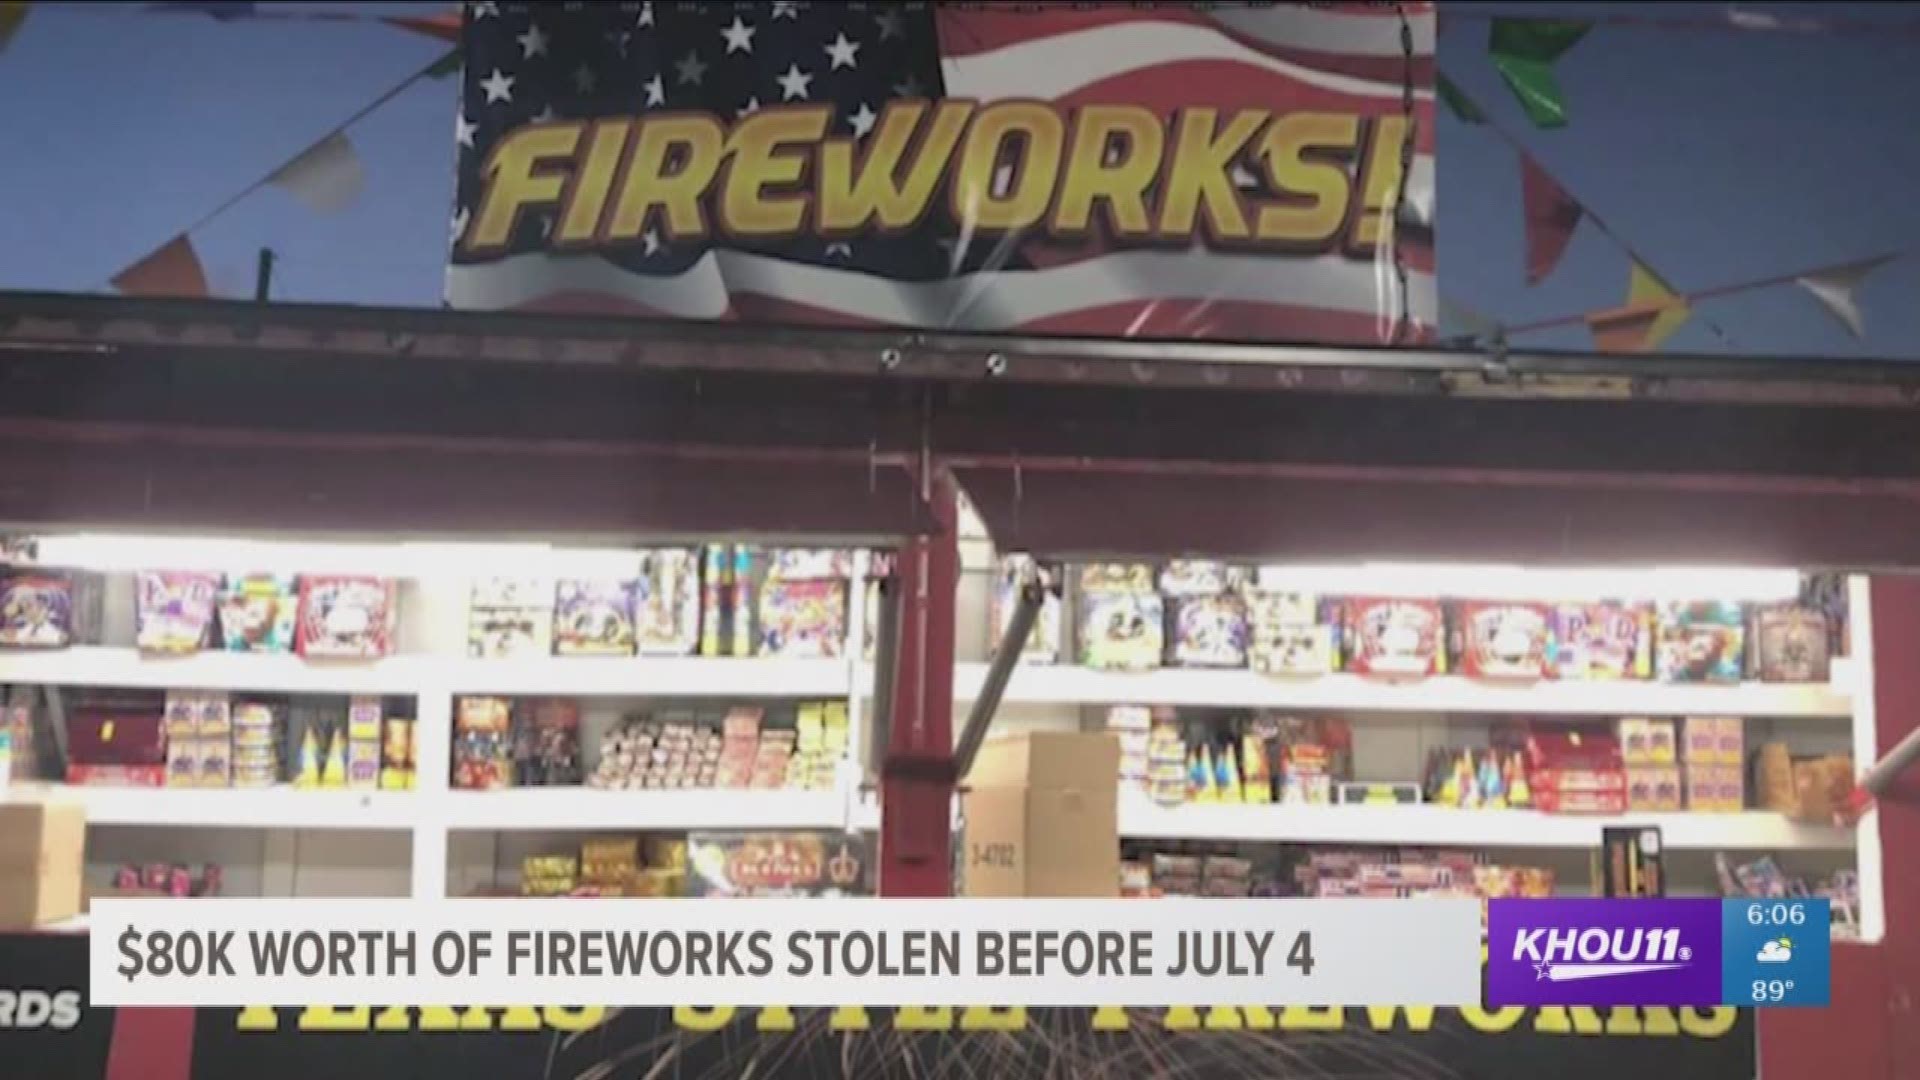 The owner of a Cypress-area fireworks stand stolen overnight is asking for the public's help tracking it down after he says a thief made off with more than $80,000 in merchandise just days before July 4.